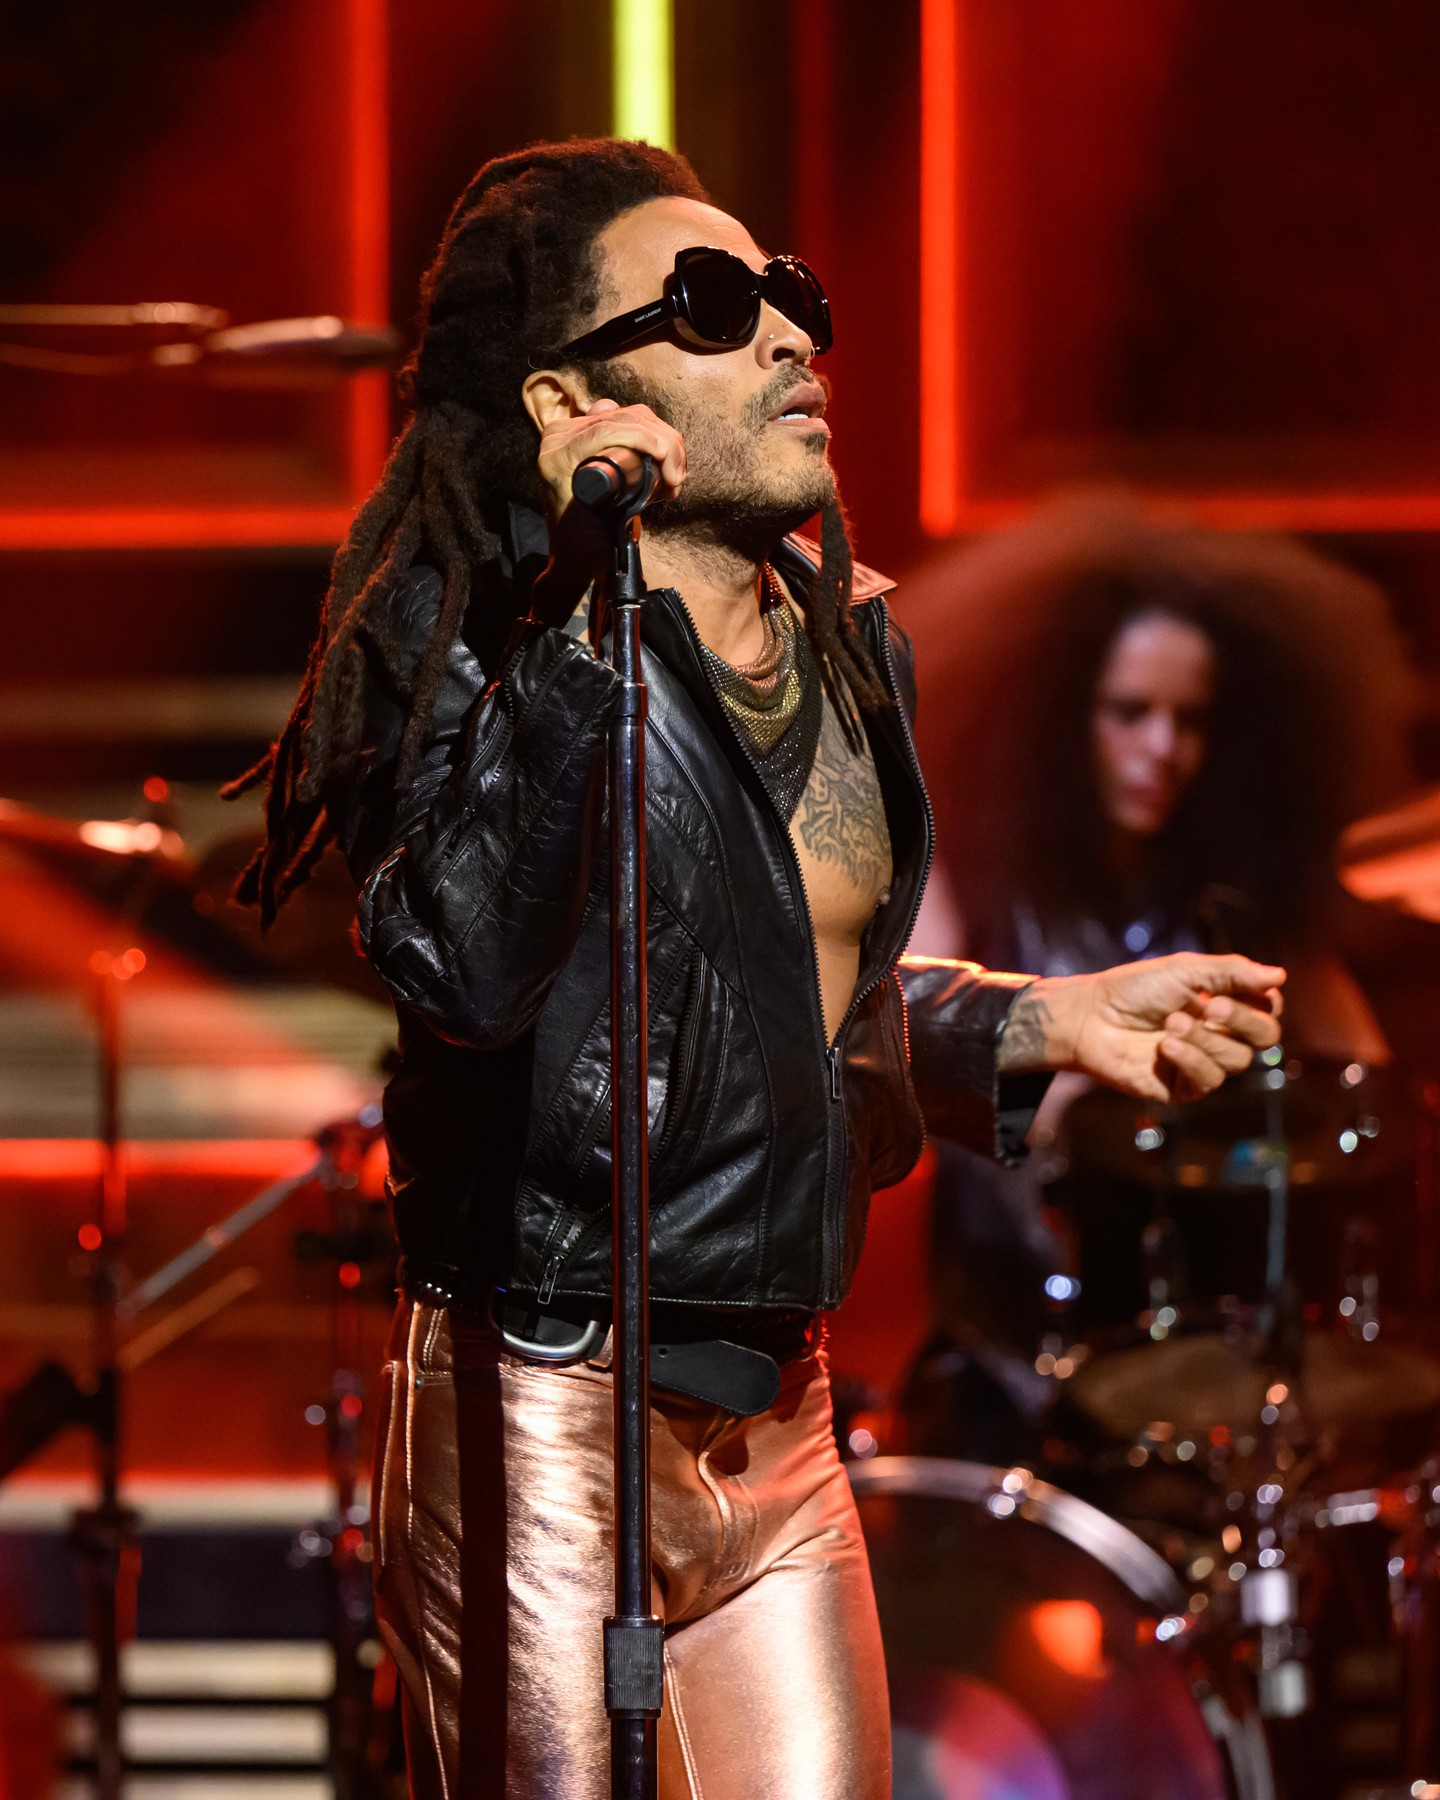 The legend. @lennykravitz from last week in Studio 6b at @fallontonight. Just pure star vibes from this performance of "Human." 